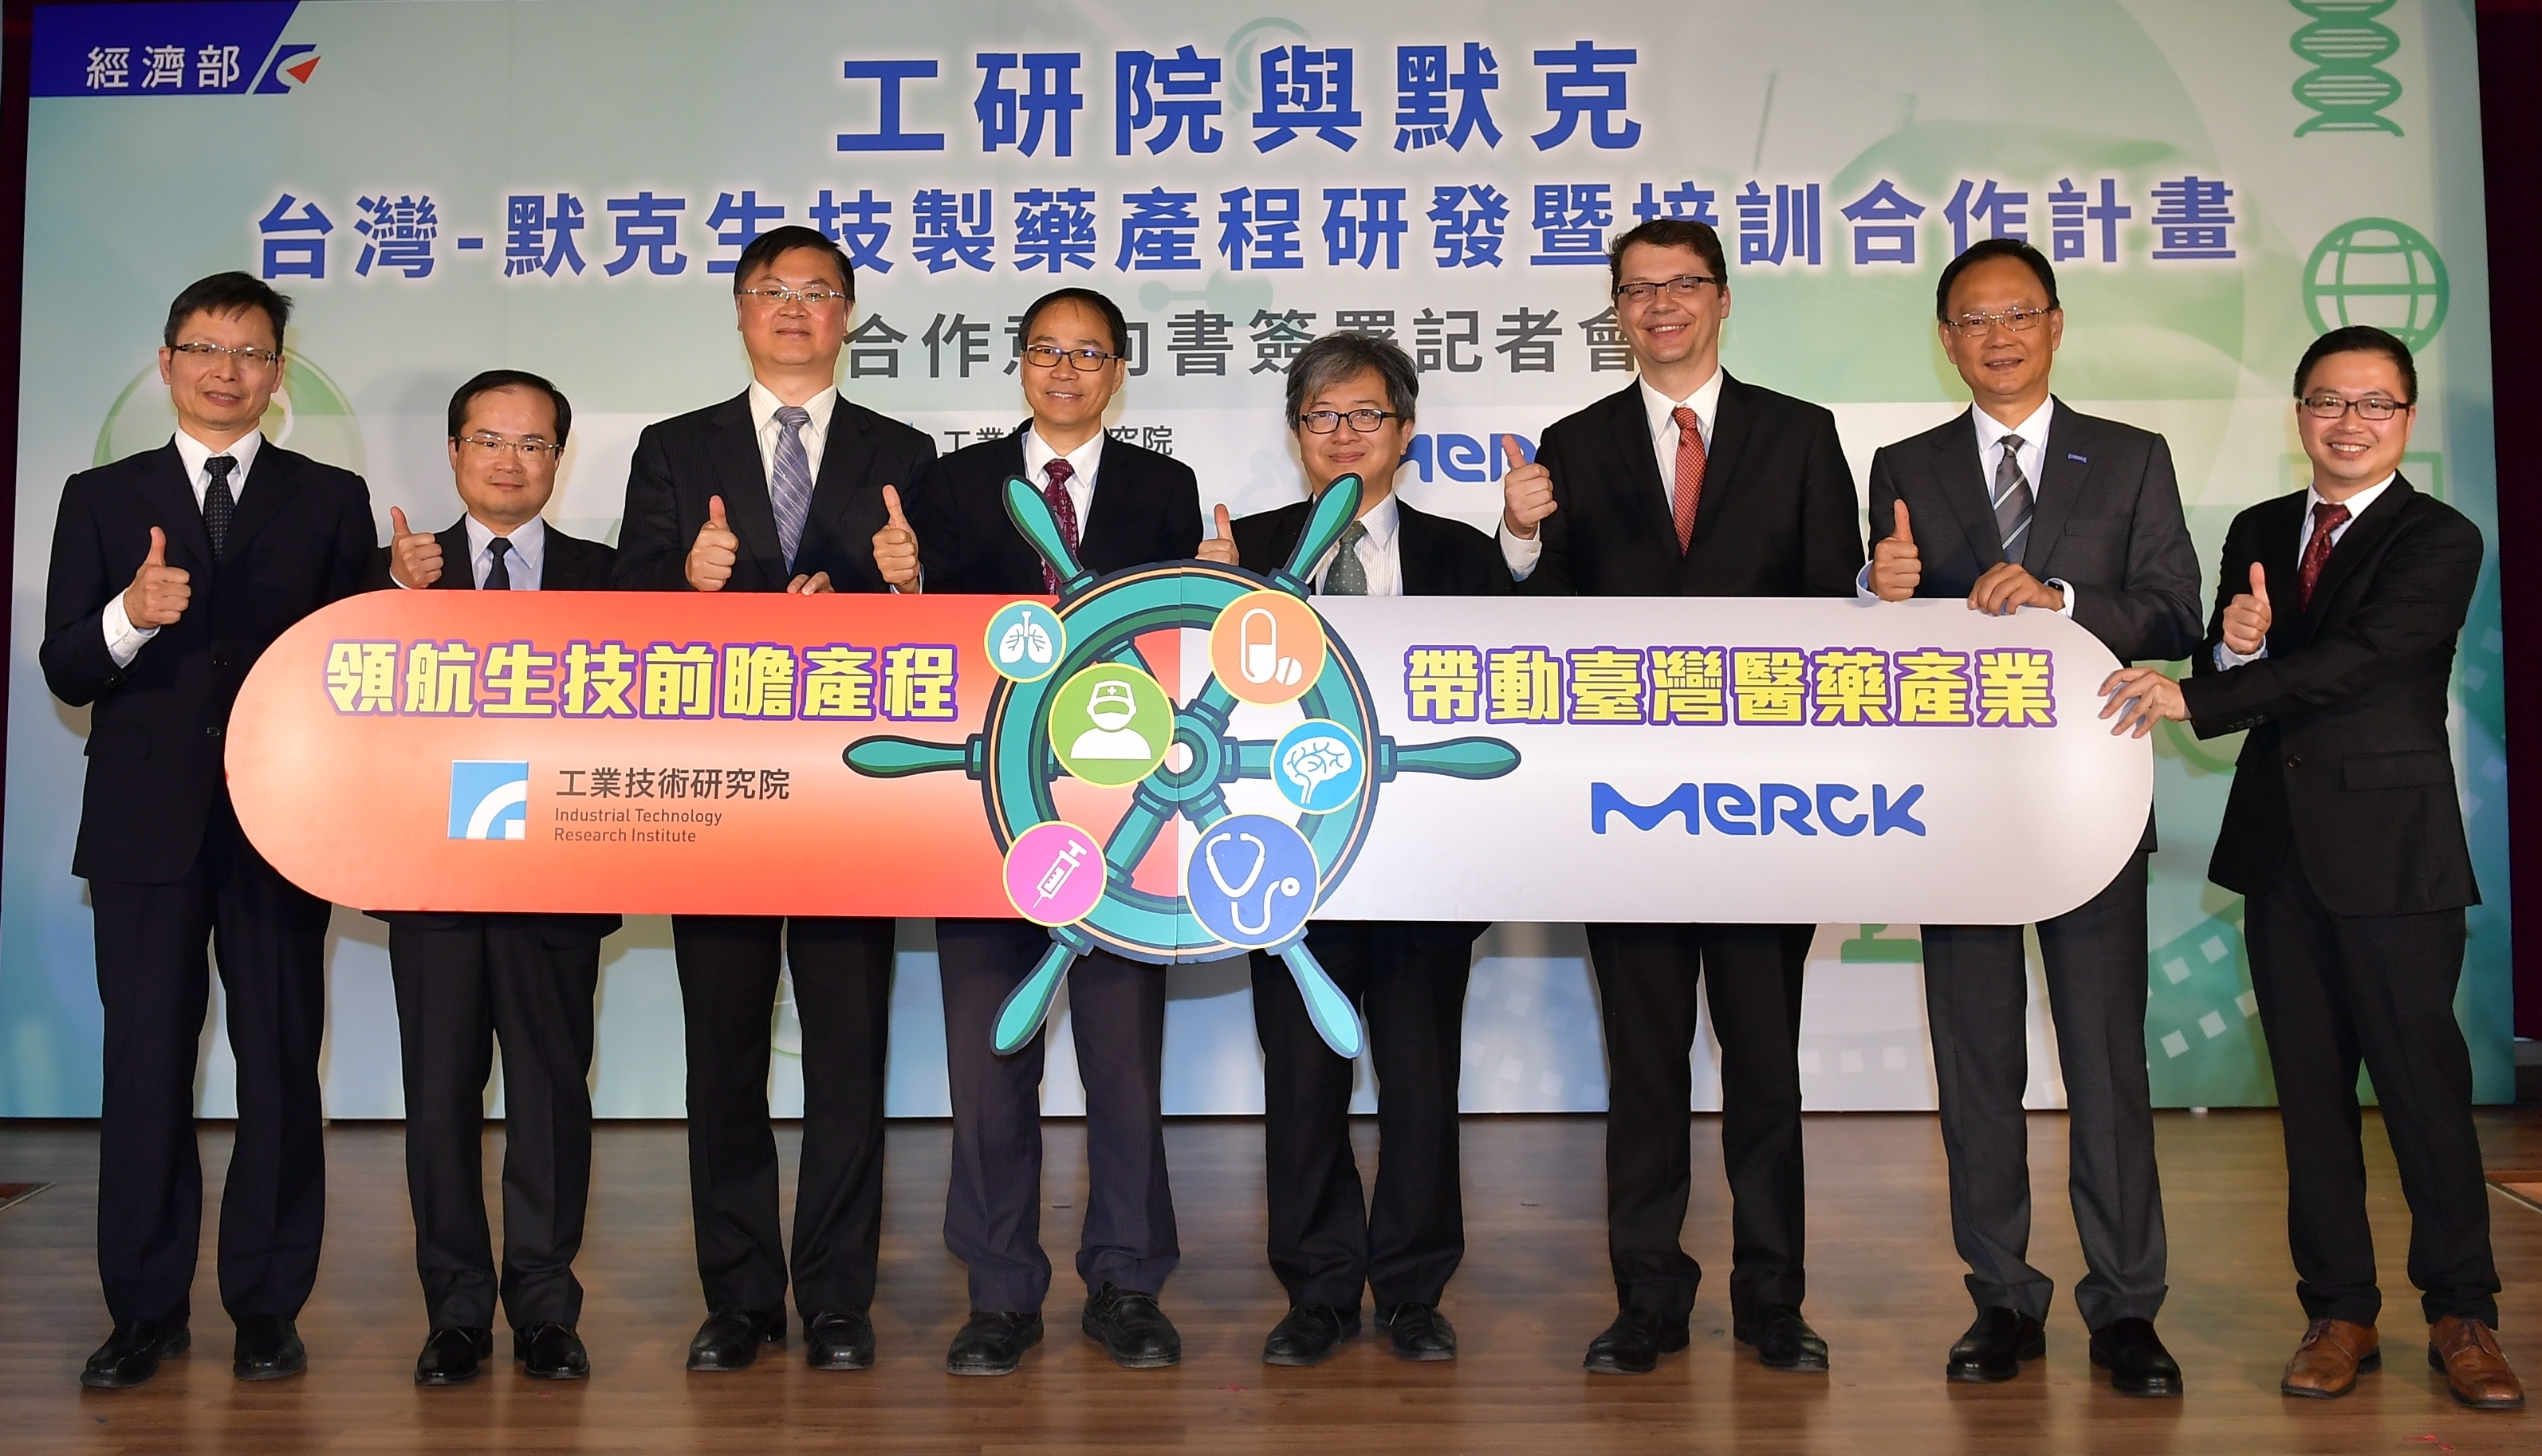 ITRI then-Executive Vice President C.T. Liu (second left), Merck Life Science Global Head of Technology Management of Process Solutions Business Willem Kools (third right) at the press conference.